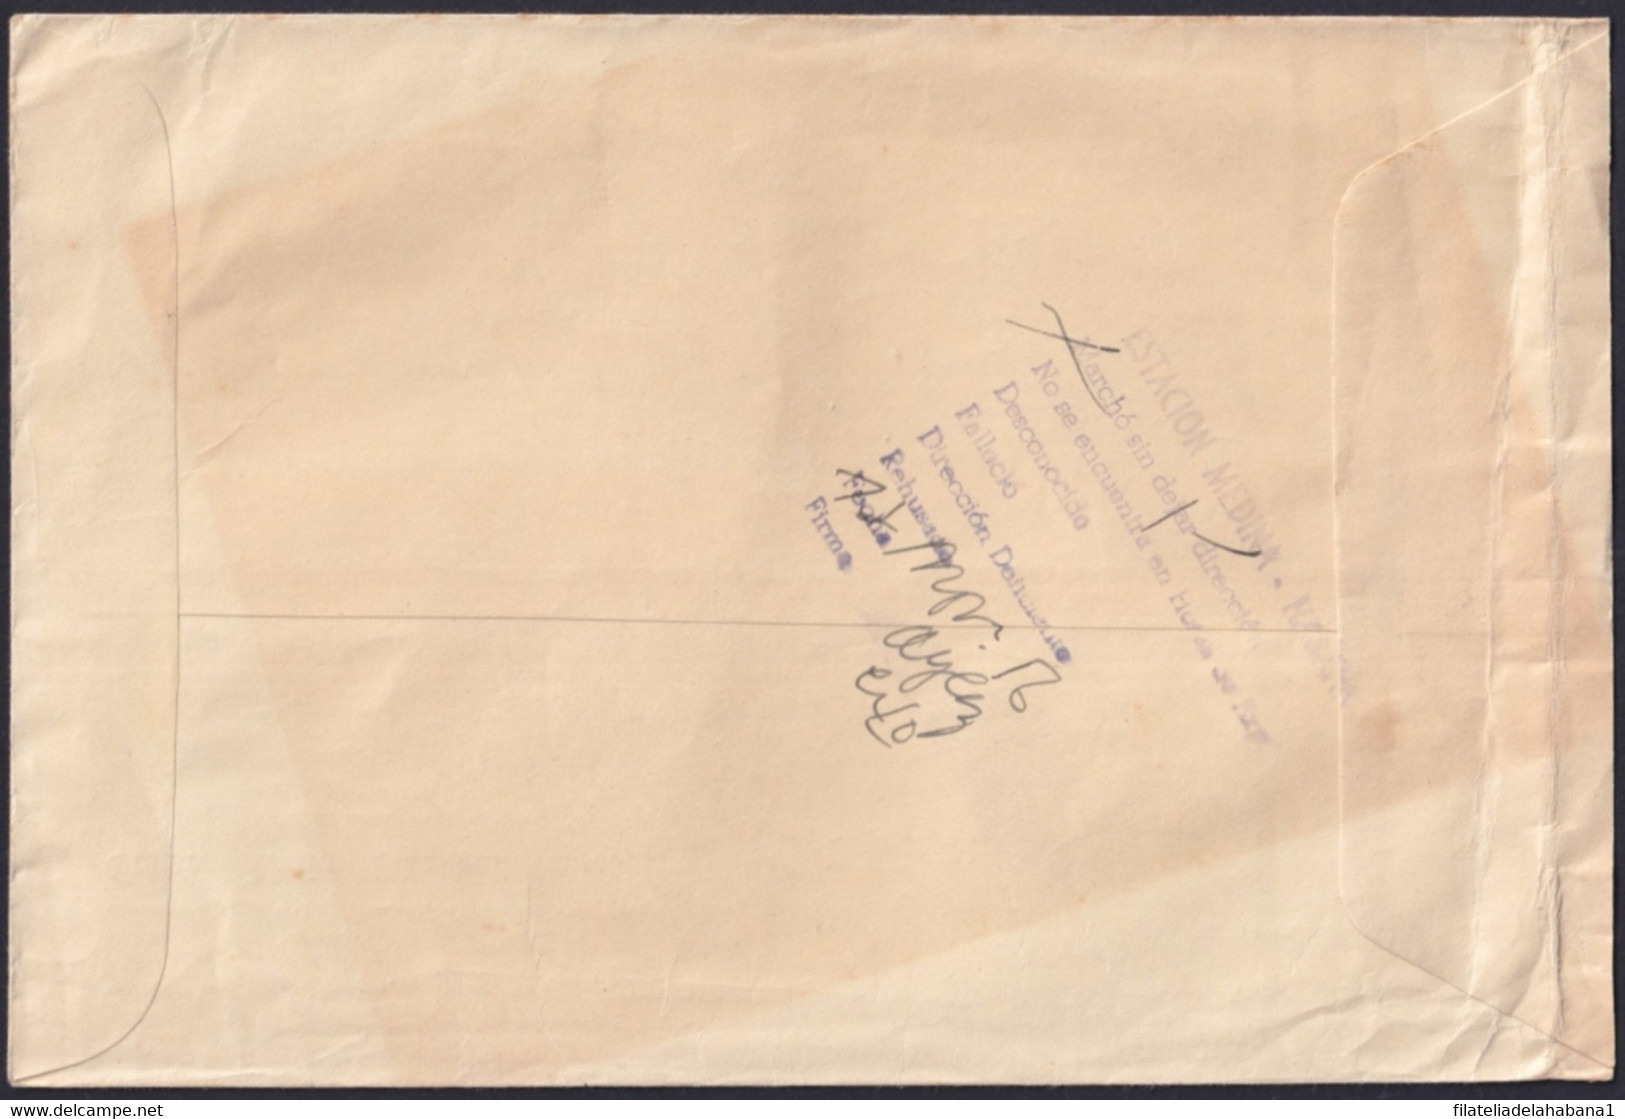 1956-H-85 CUBA 1959 LG-2159 OFFICIAL COVER POSTMARK FORWARDED CIUDAD MILITAR. - Covers & Documents